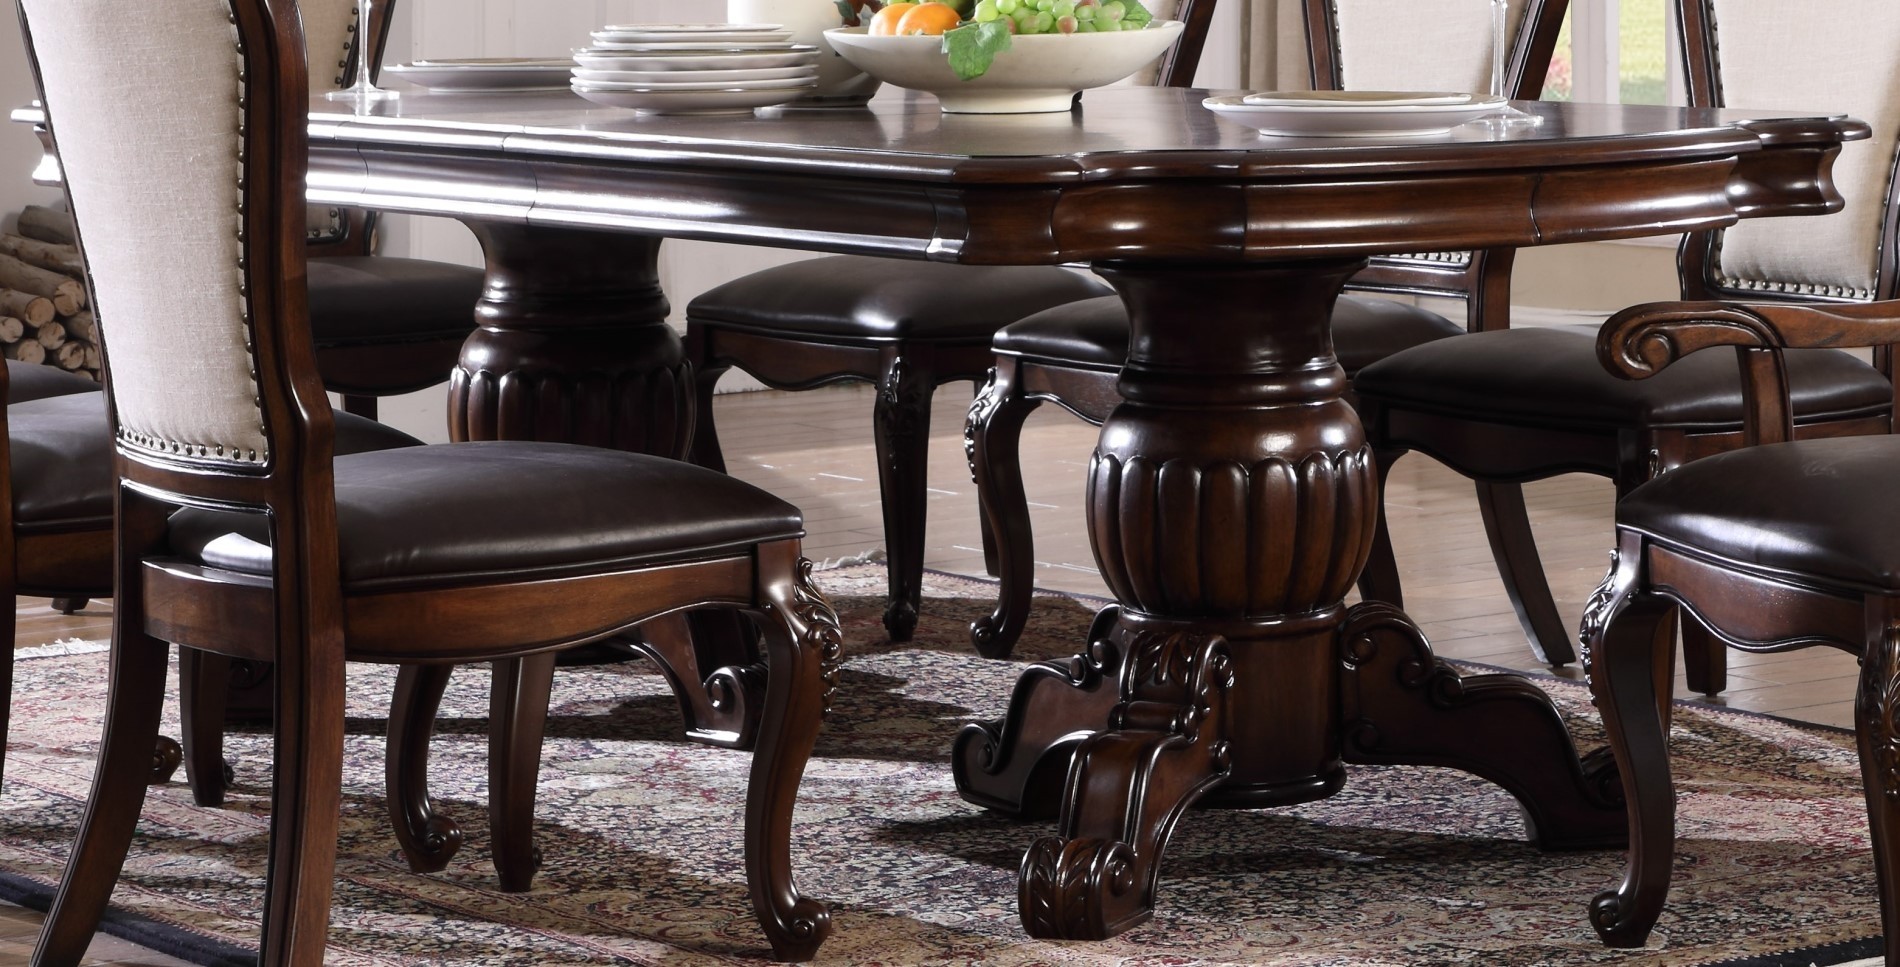 Brentwood traditional 5pc double pedestal dining table set